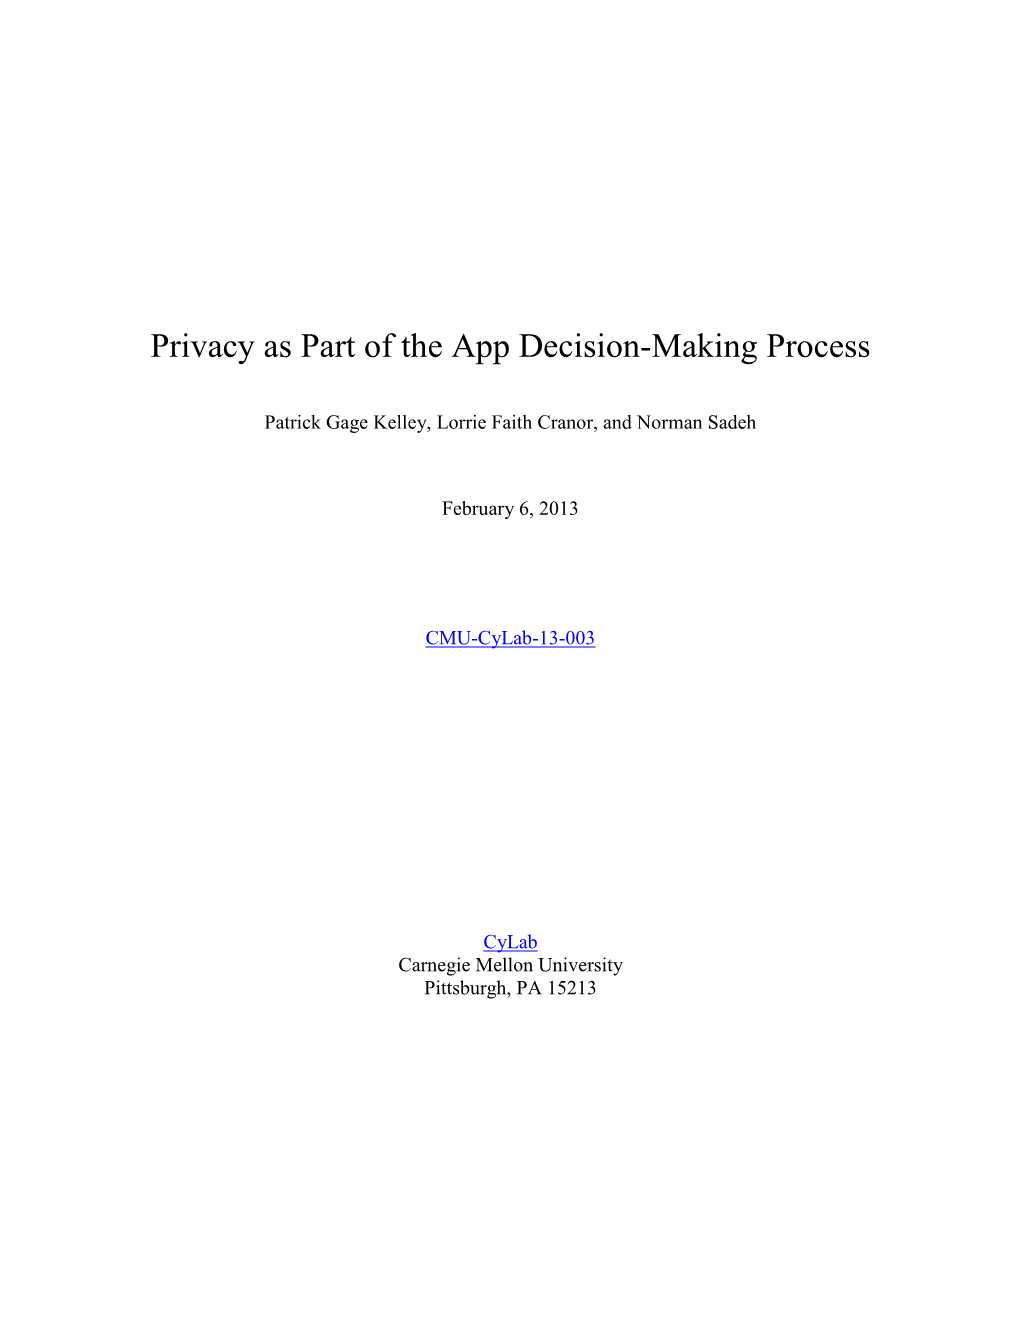 Privacy As Part of the App Decision-Making Process